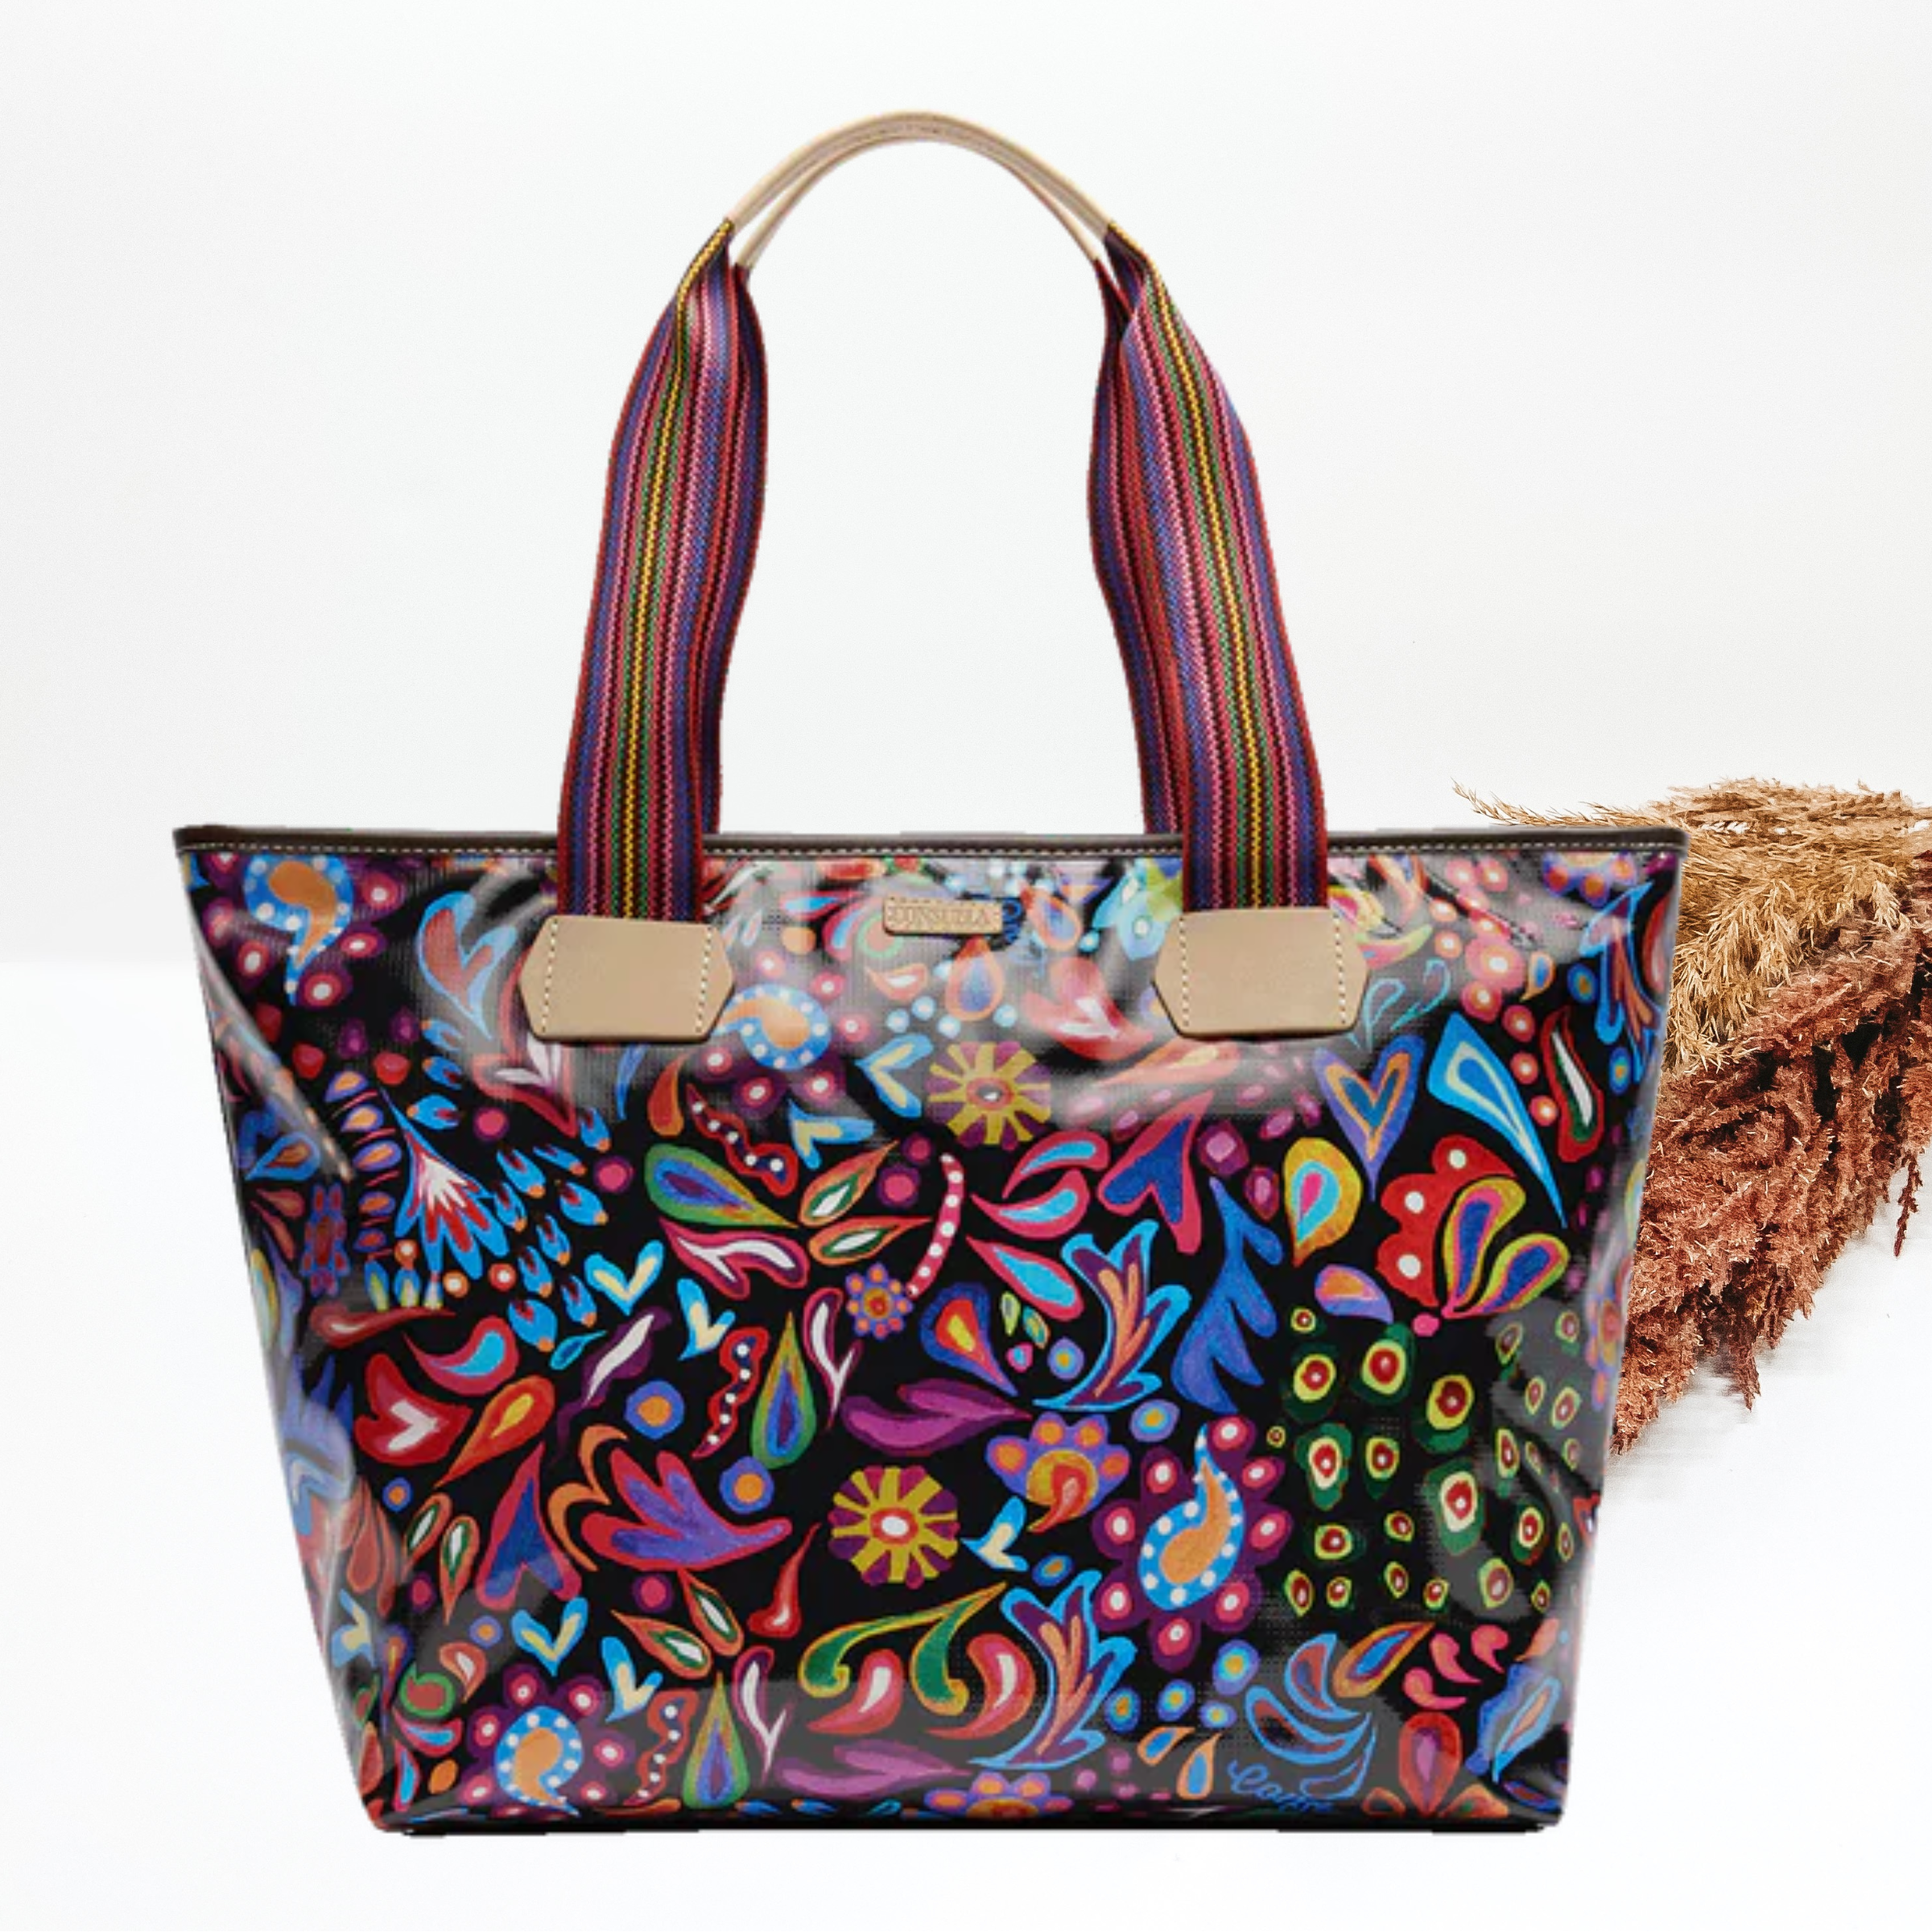 This bag is a large tote with leather handles. This tote is black with a multicolored paisley print all over. This tote is pictured in front of brown pompous grass on a white background. 